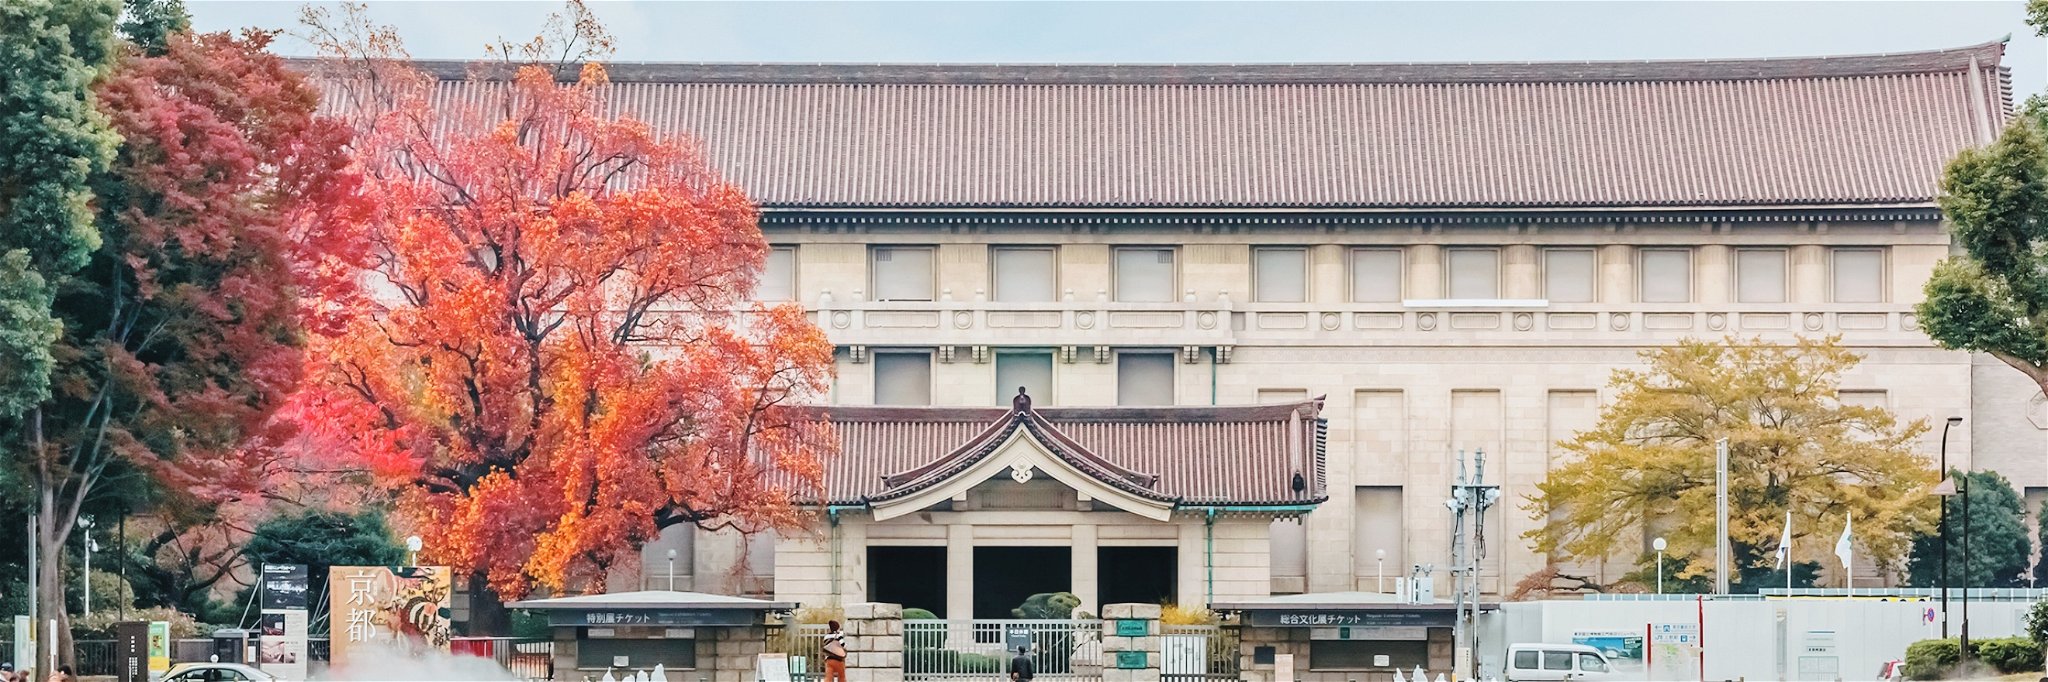 Tokyo National Museum&nbsp;will be celebrating its 150th anniversary in 2022.&nbsp;